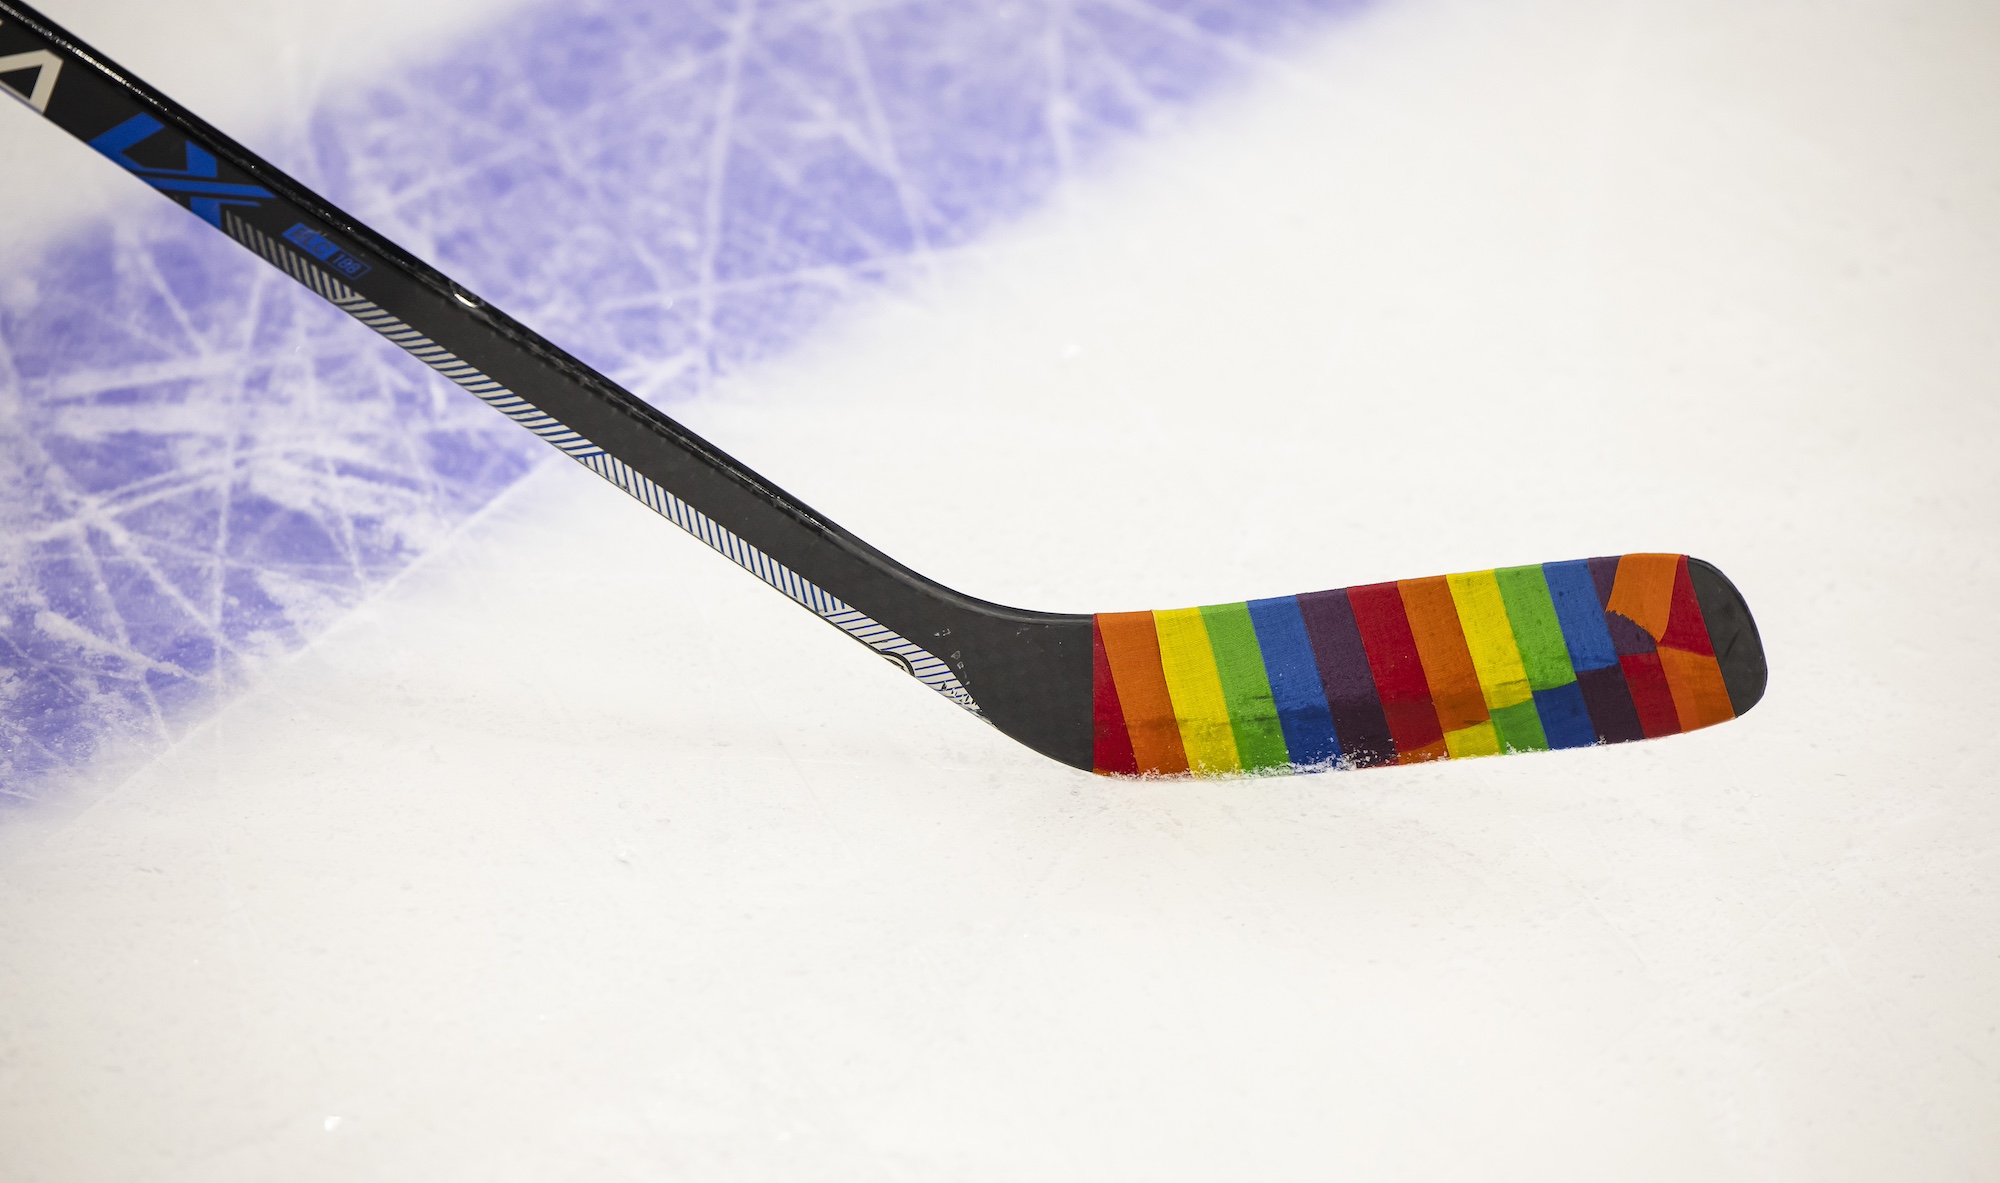 TAMPA, FL - MARCH 7: Players from the Tampa Bay Lightning skate during warmups with special hockey tape for Pride Night against the Philadelphia Flyers at Amalie Arena on March 7, 2023 in Tampa, Florida. (Photo by Mark LoMoglio/NHLI via Getty Images)